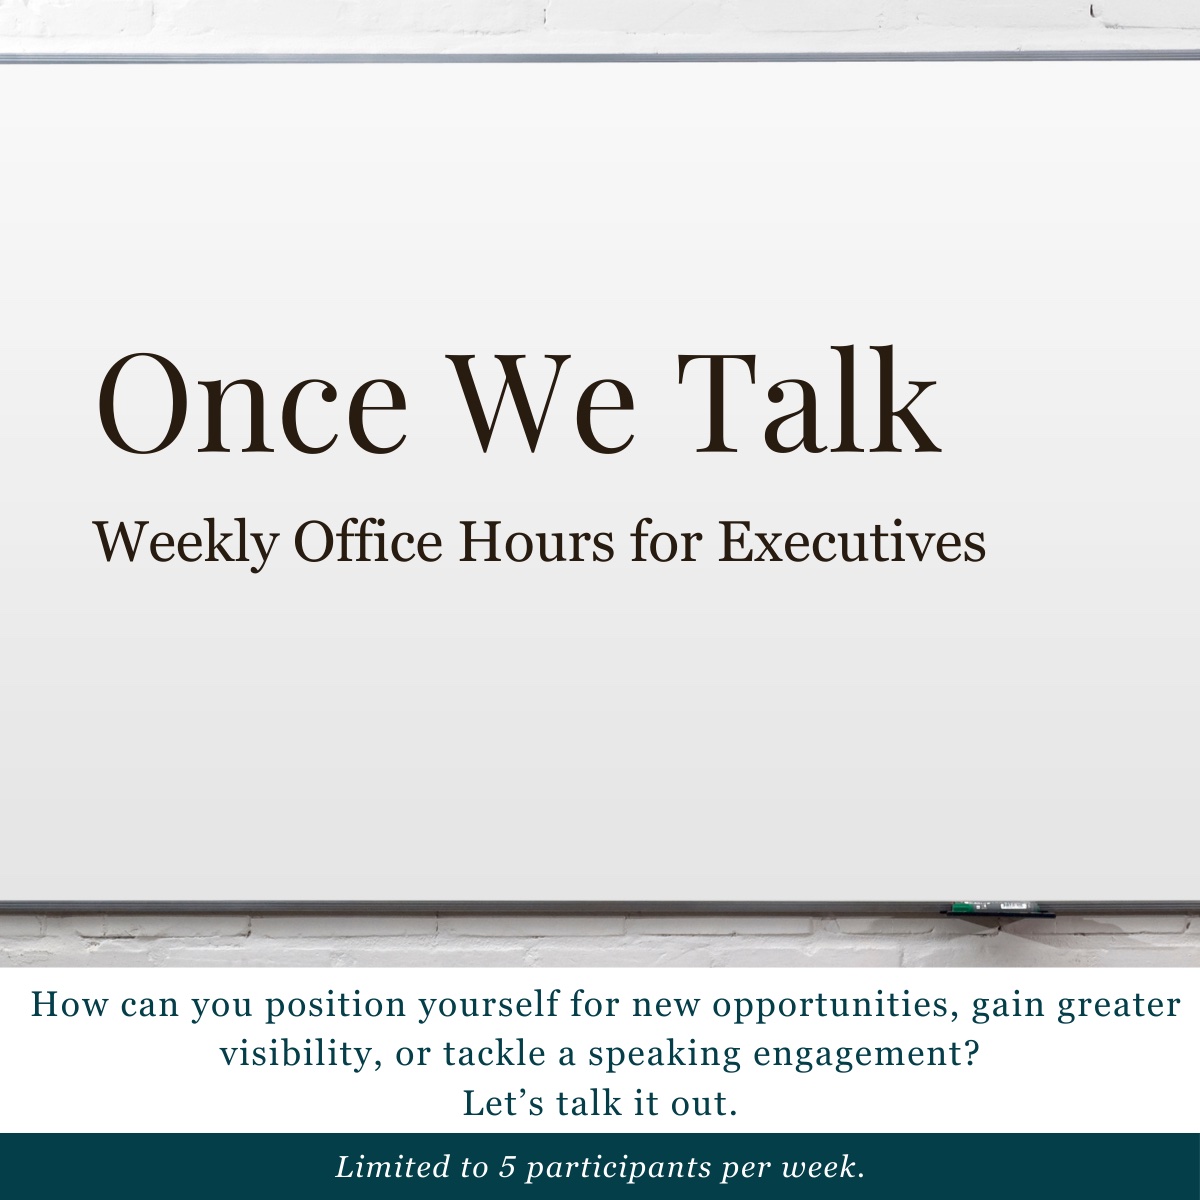 Image of Once We Talk, our office hours meeting every Friday at 1pm EST.